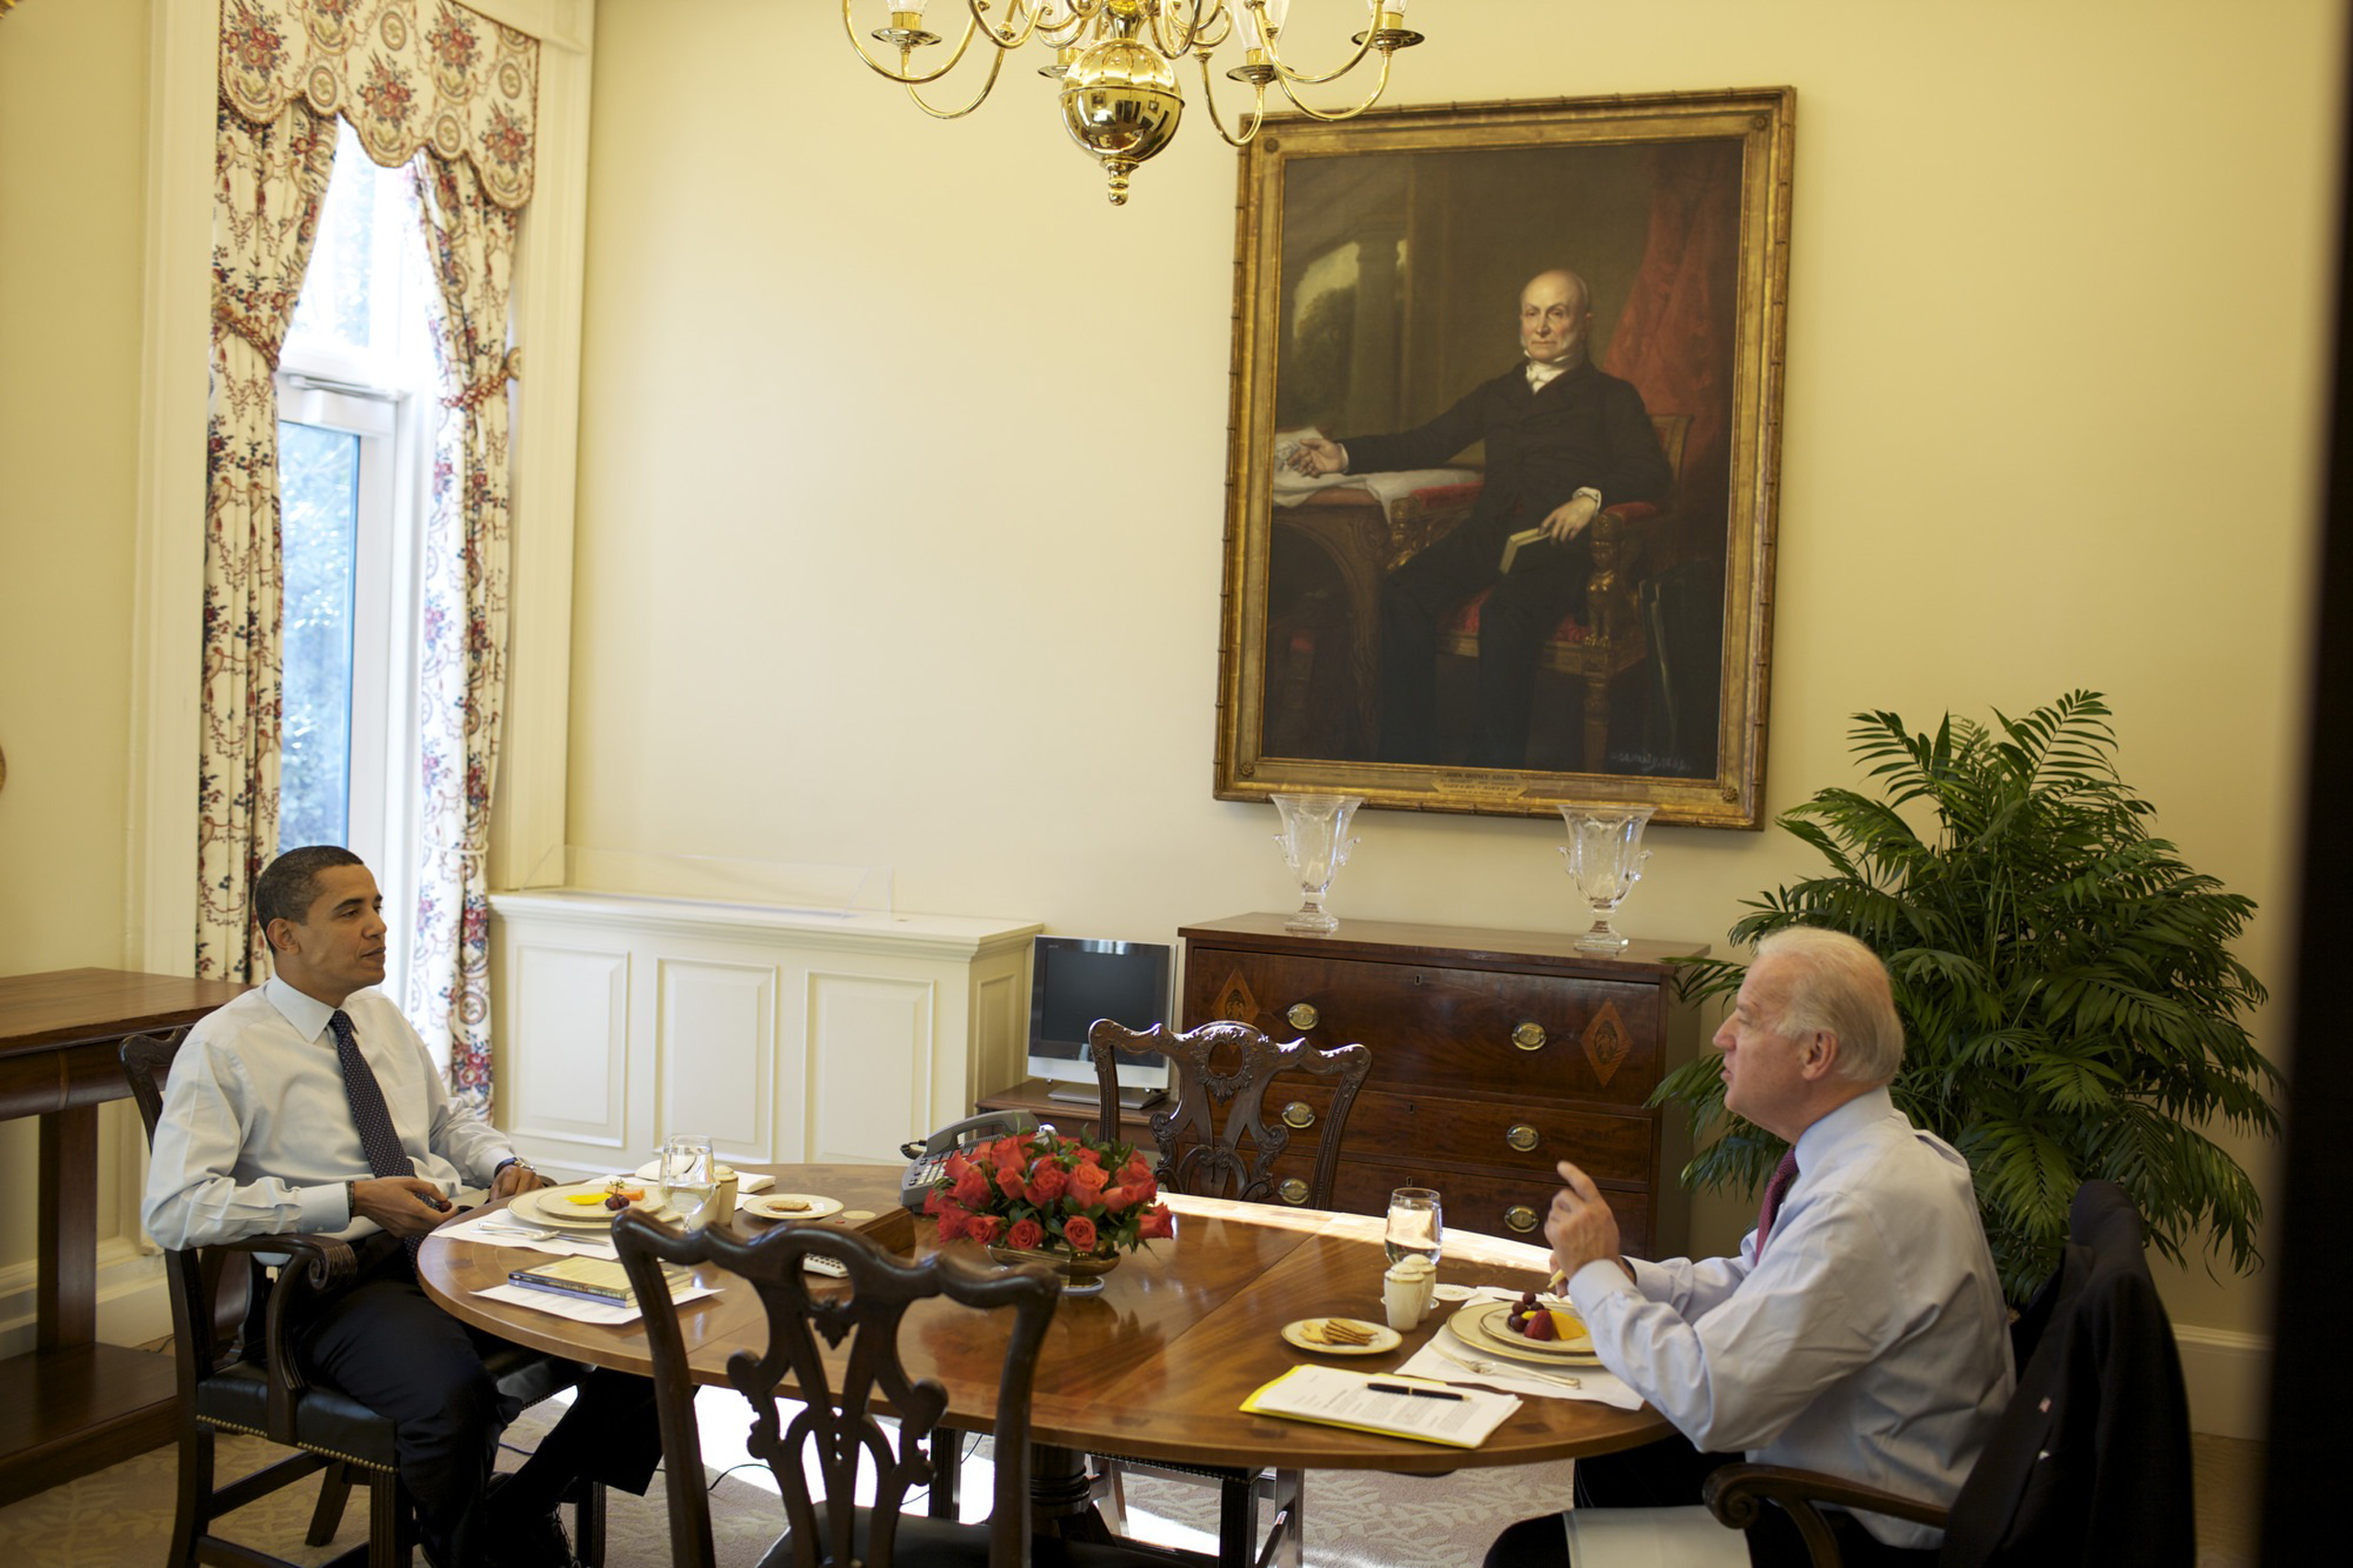 President Barack Obama and Vice President Joe Biden have lunch in the Private Dining Room of the West Wing in Washington, DC., on Jan. 23, 2009.